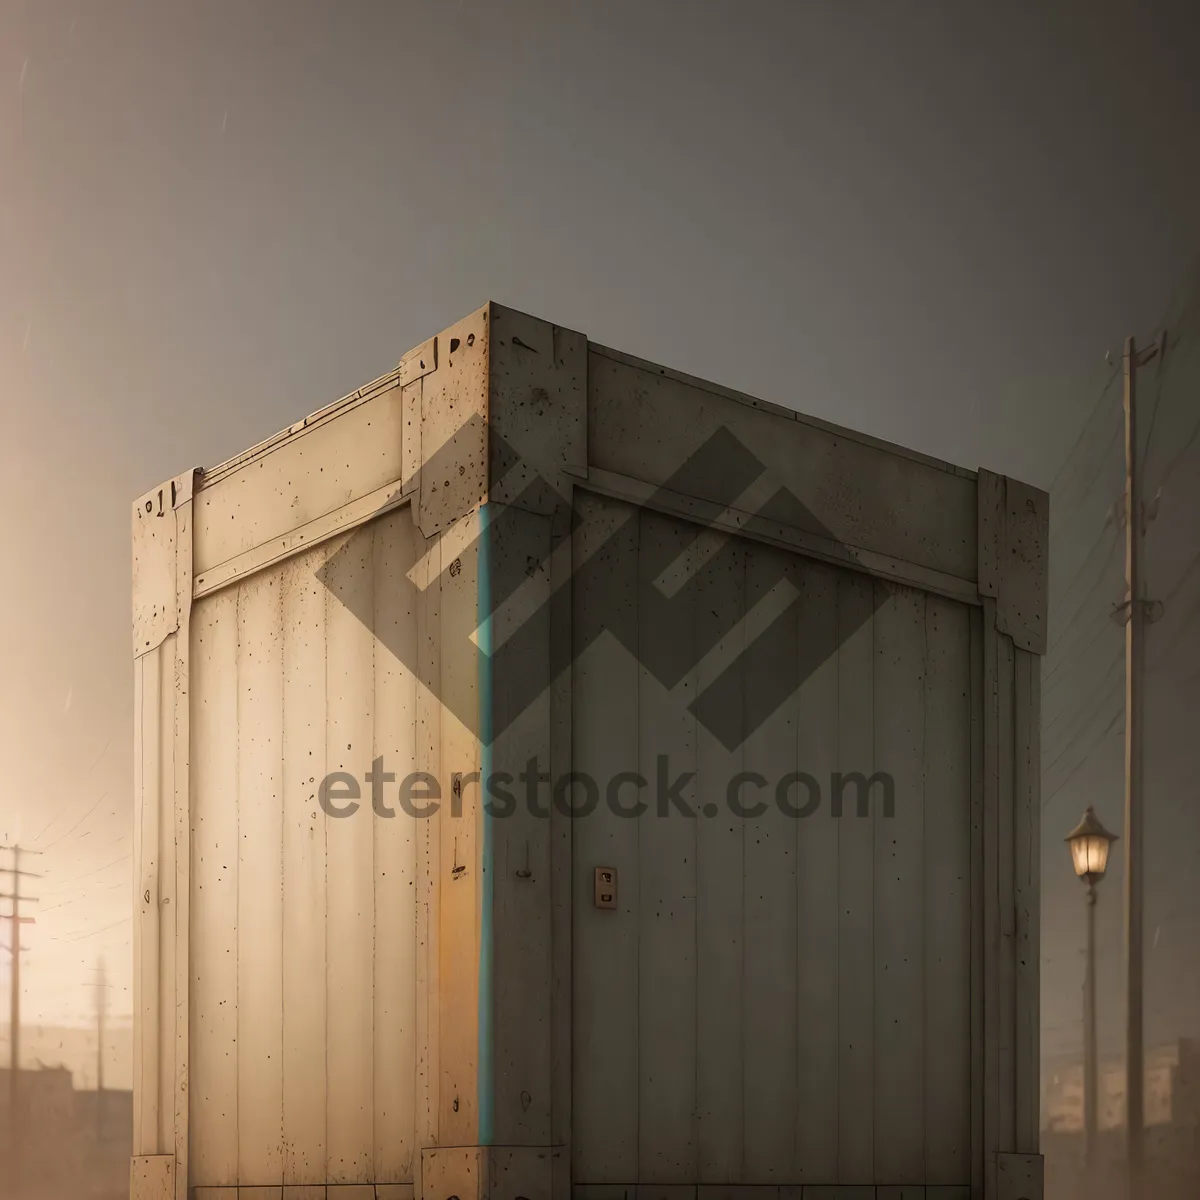 Picture of Old exterior house with container crates